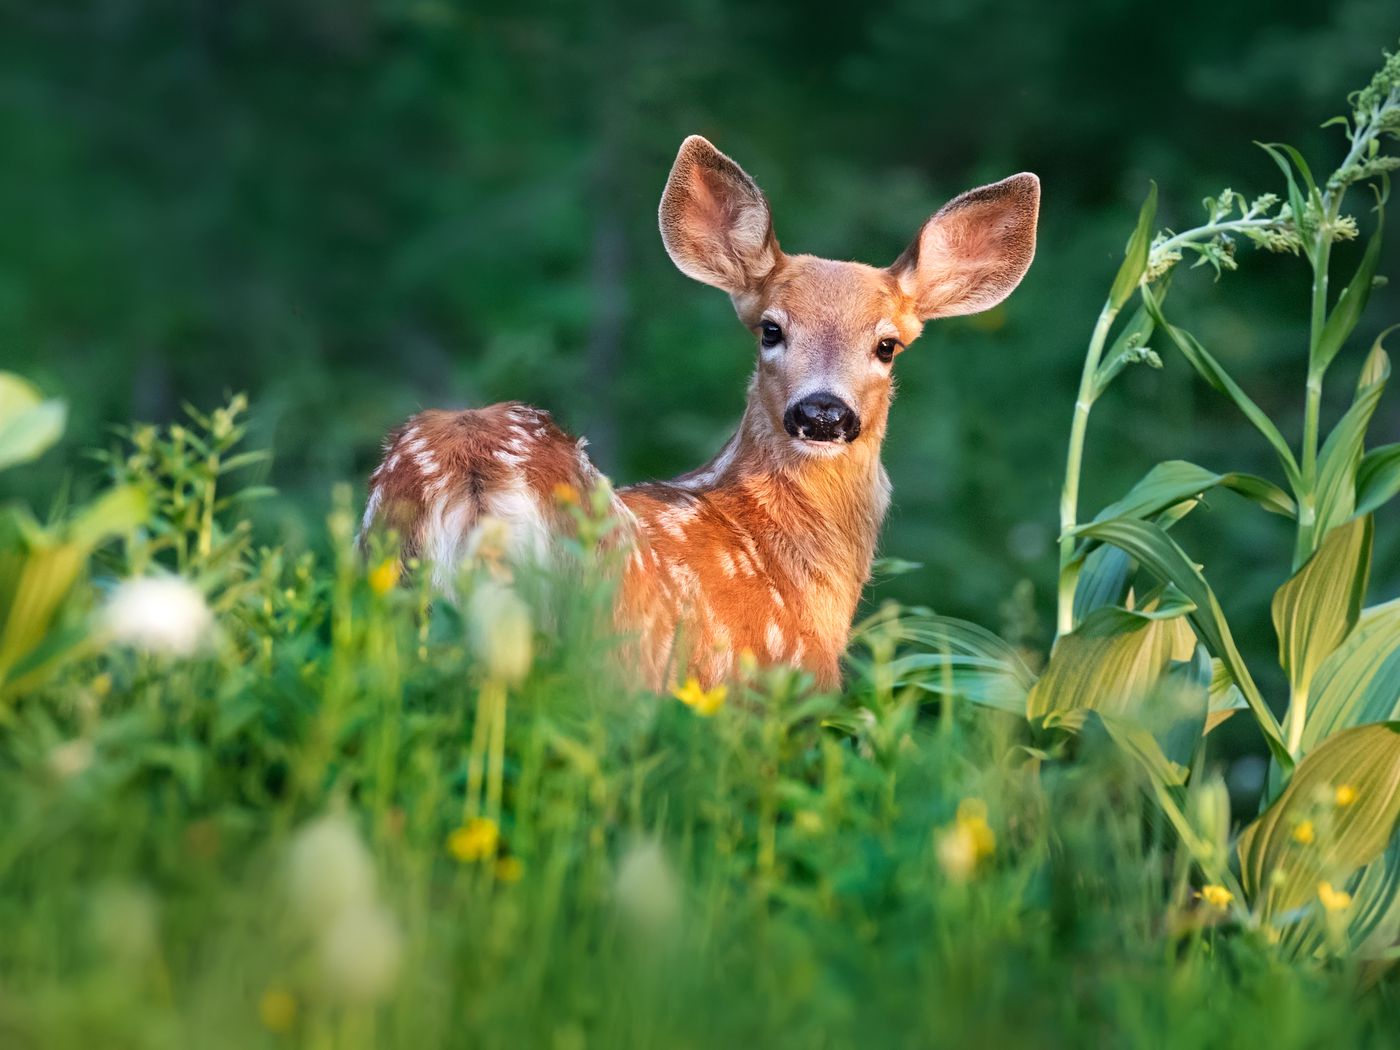 Covid-19 in animals: Coronavirus spillover to deer could affect humans - Vox